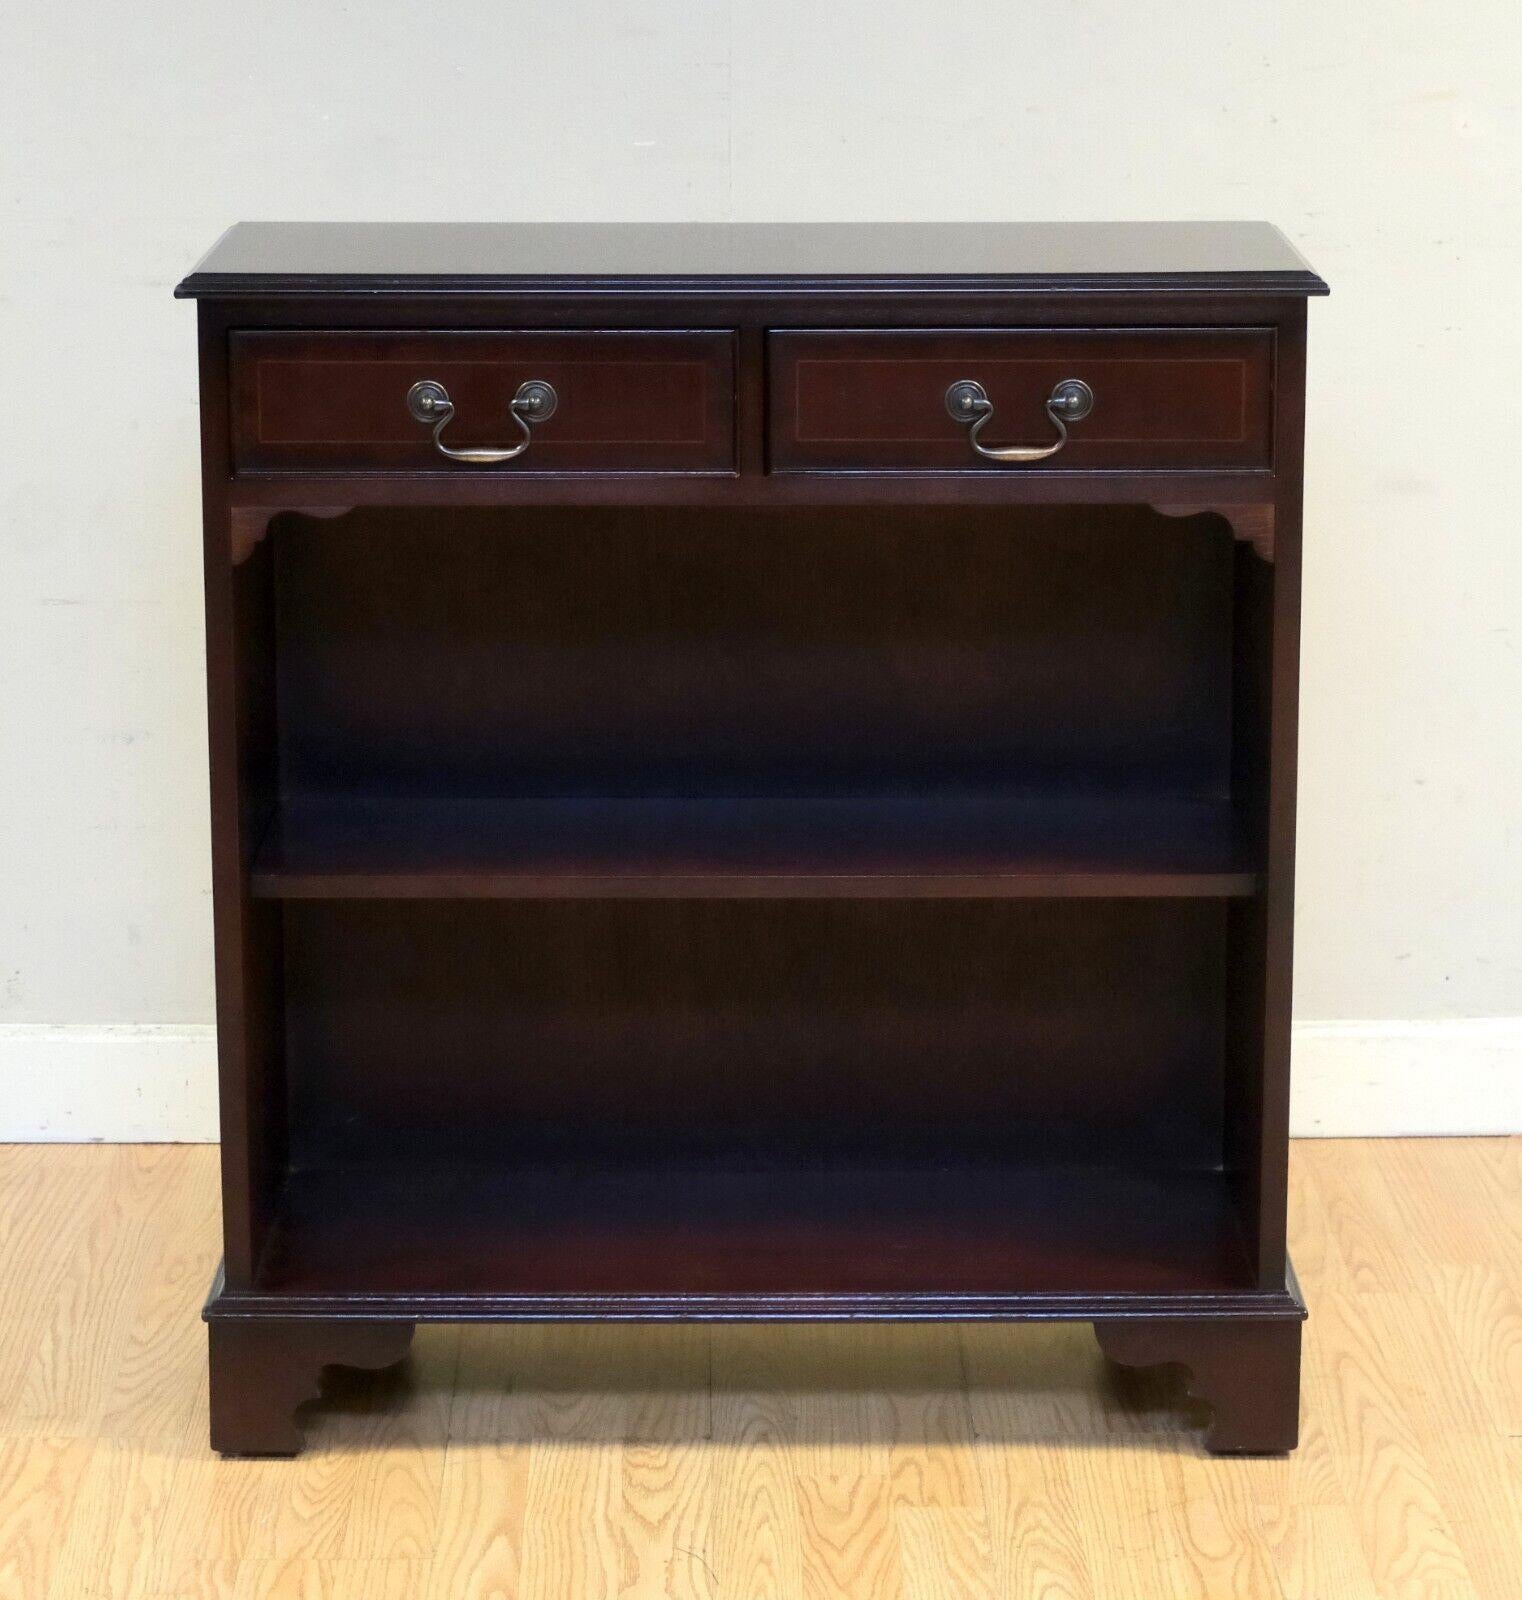 Country CLASSIC VINTAGE OPEN DWARF LiBRARY BOOKCASE WITH TWO DRAWERS & SINGLE SHELF For Sale